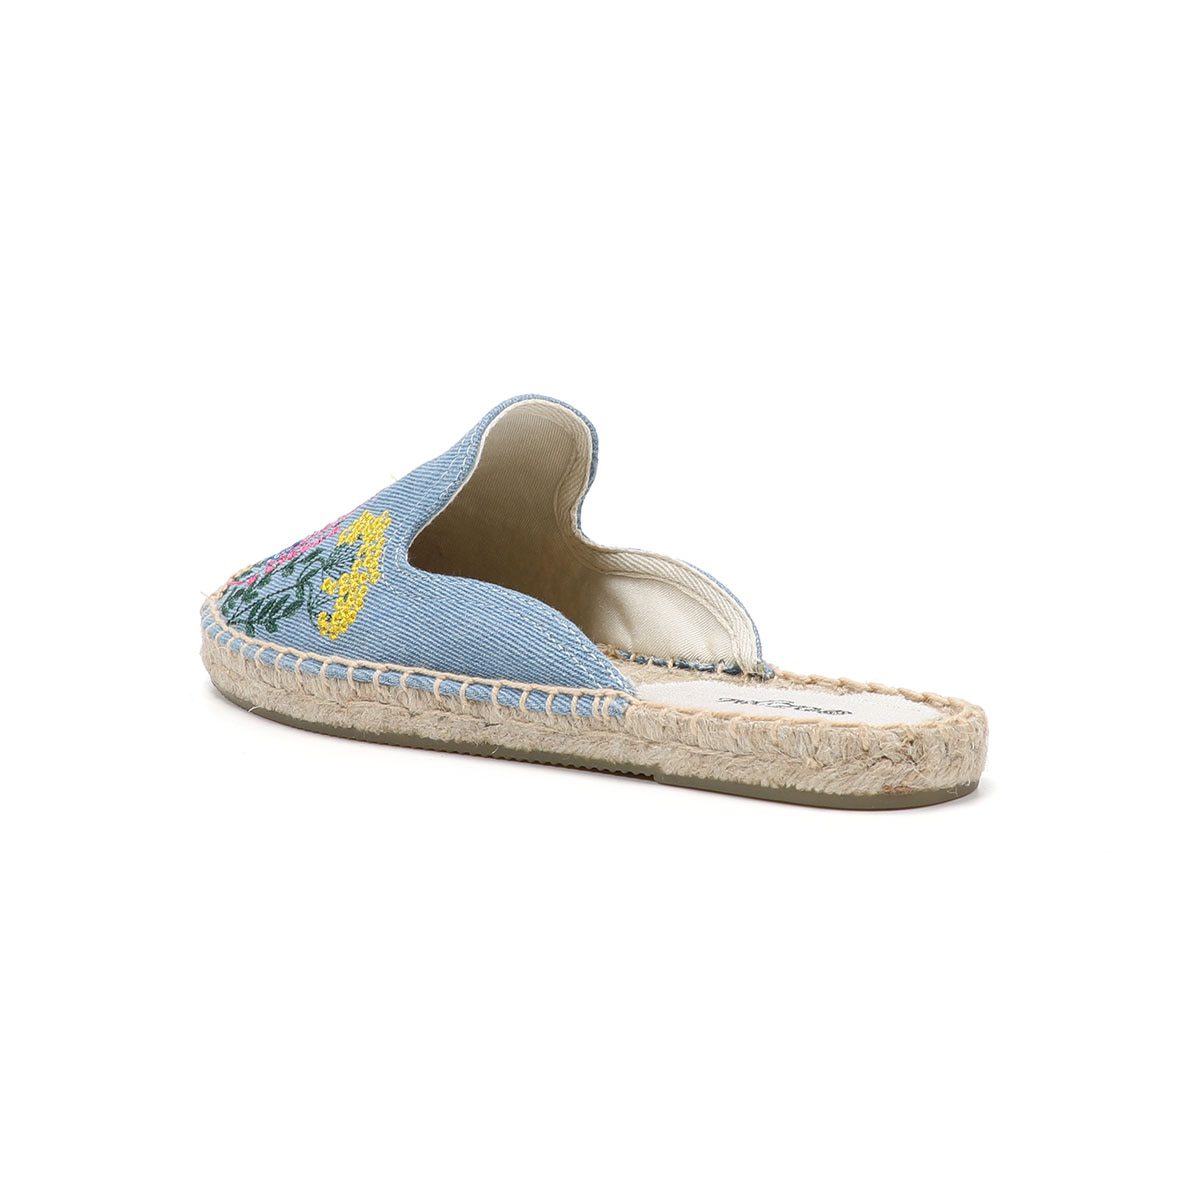 Ladies Summer Fashion Toe Slippers Sandals Flat Comfortable Breathable Slip-On Espadrilles Denim Floral Embroidered Mules